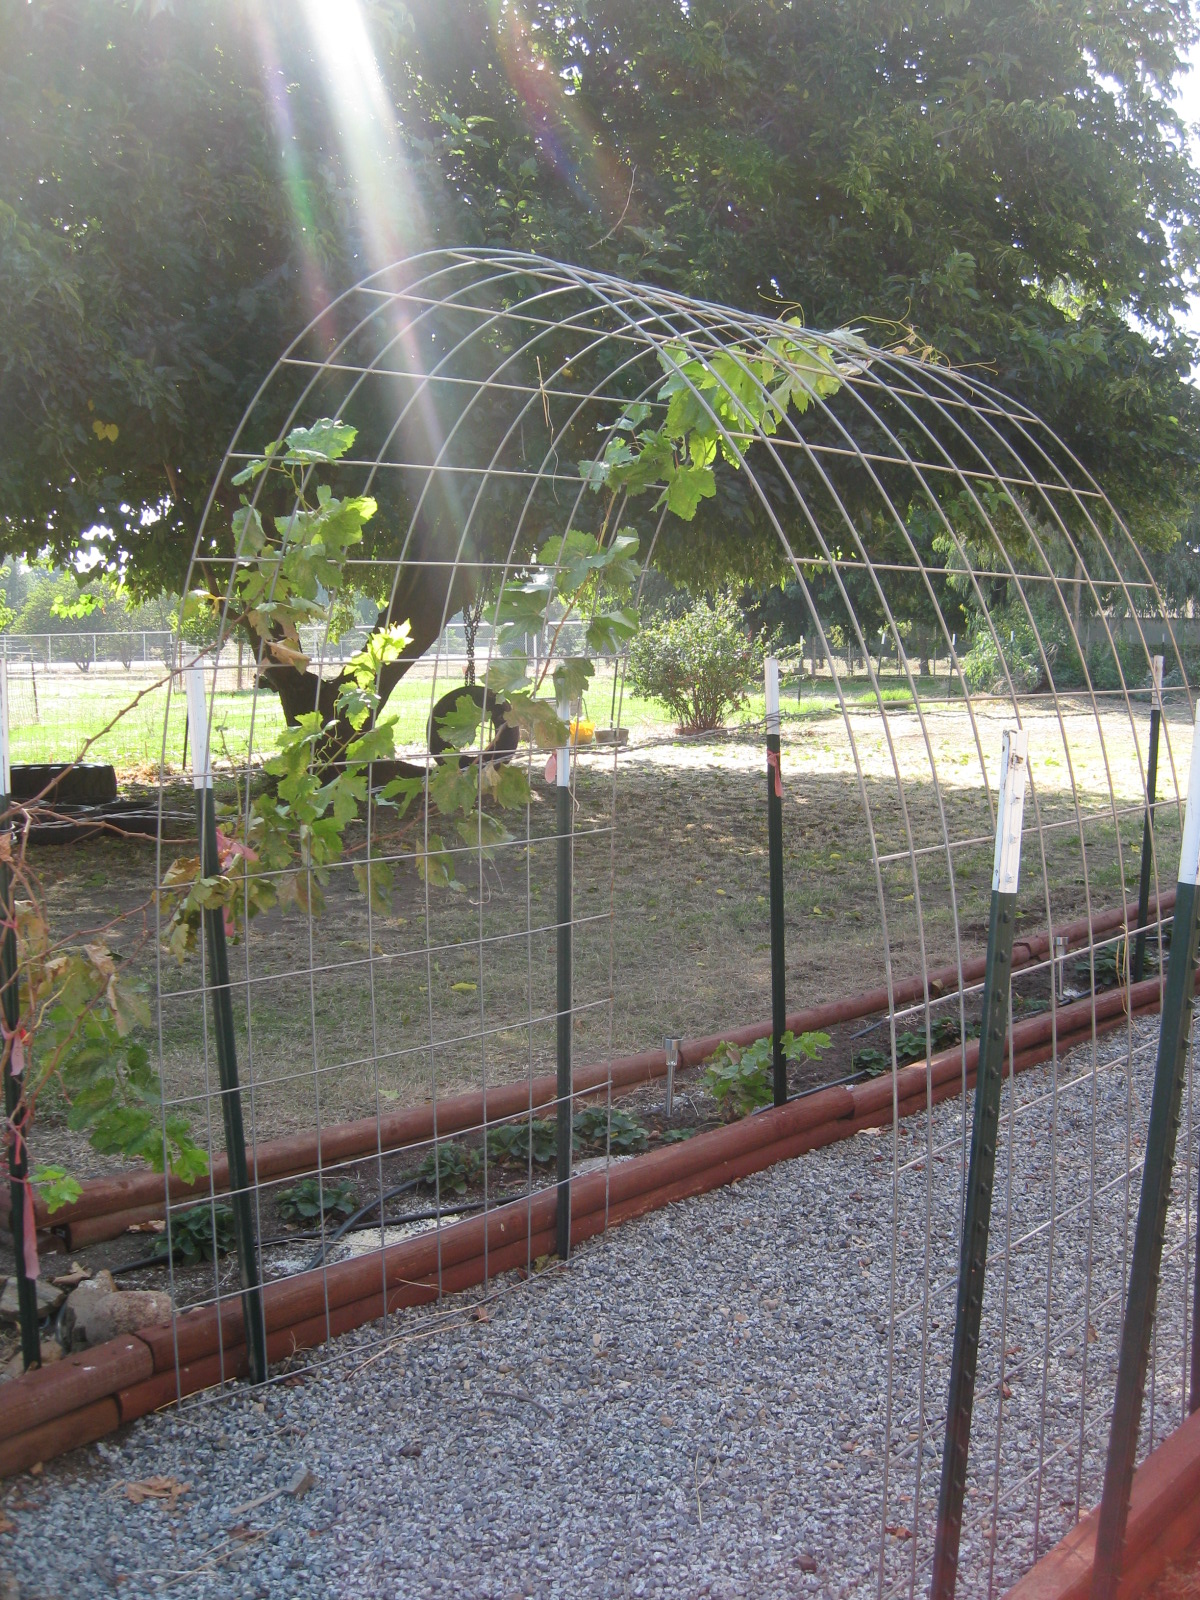 What if IT is today? - A Survivalist's Blog: The easy grape arbor